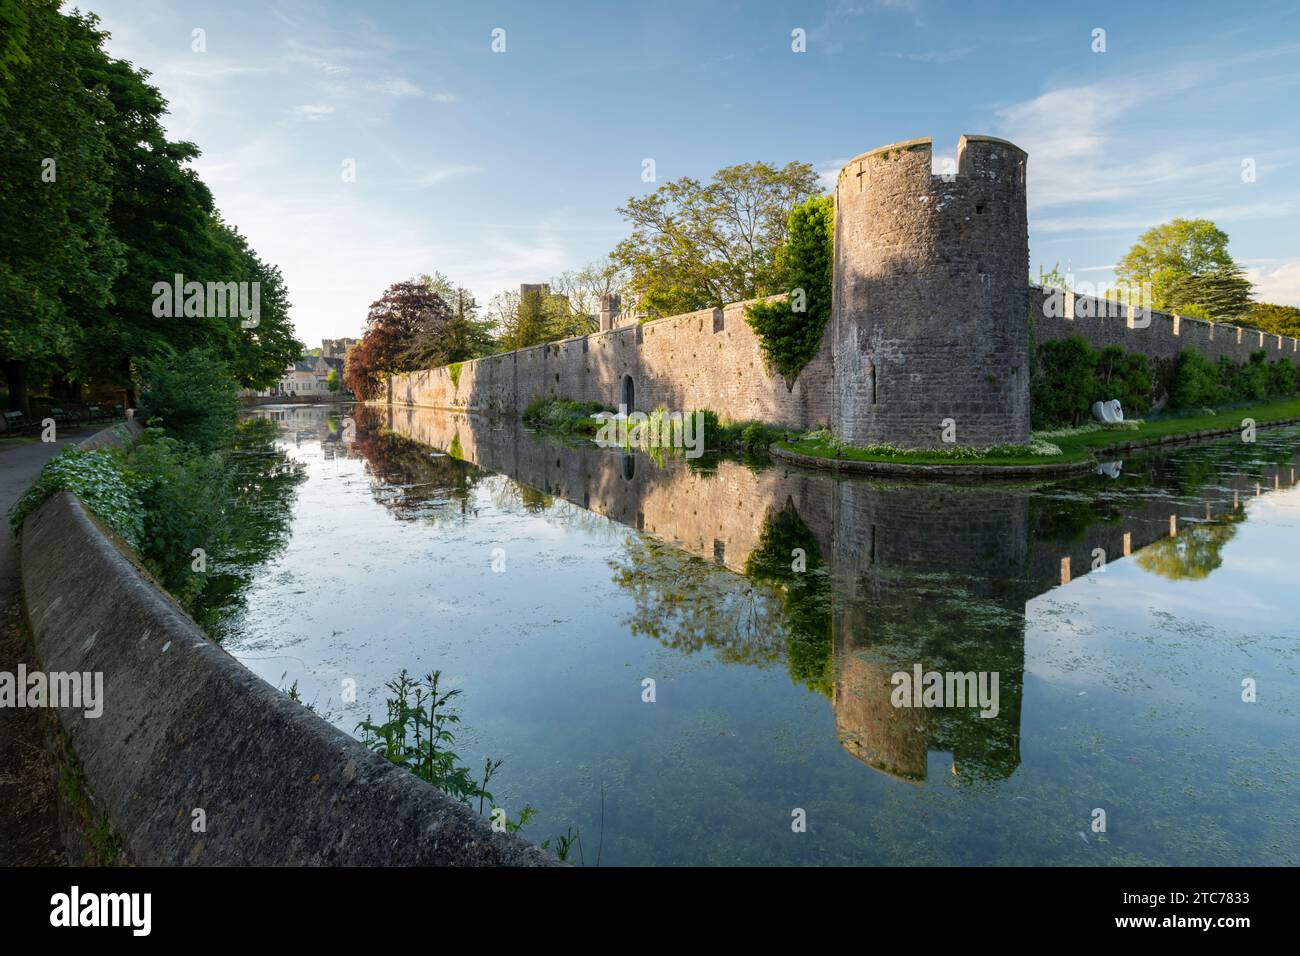 The Bishop's Palace reflected in its moat, Wells, Somerset, England.  Spring (May) 2019. Stock Photo